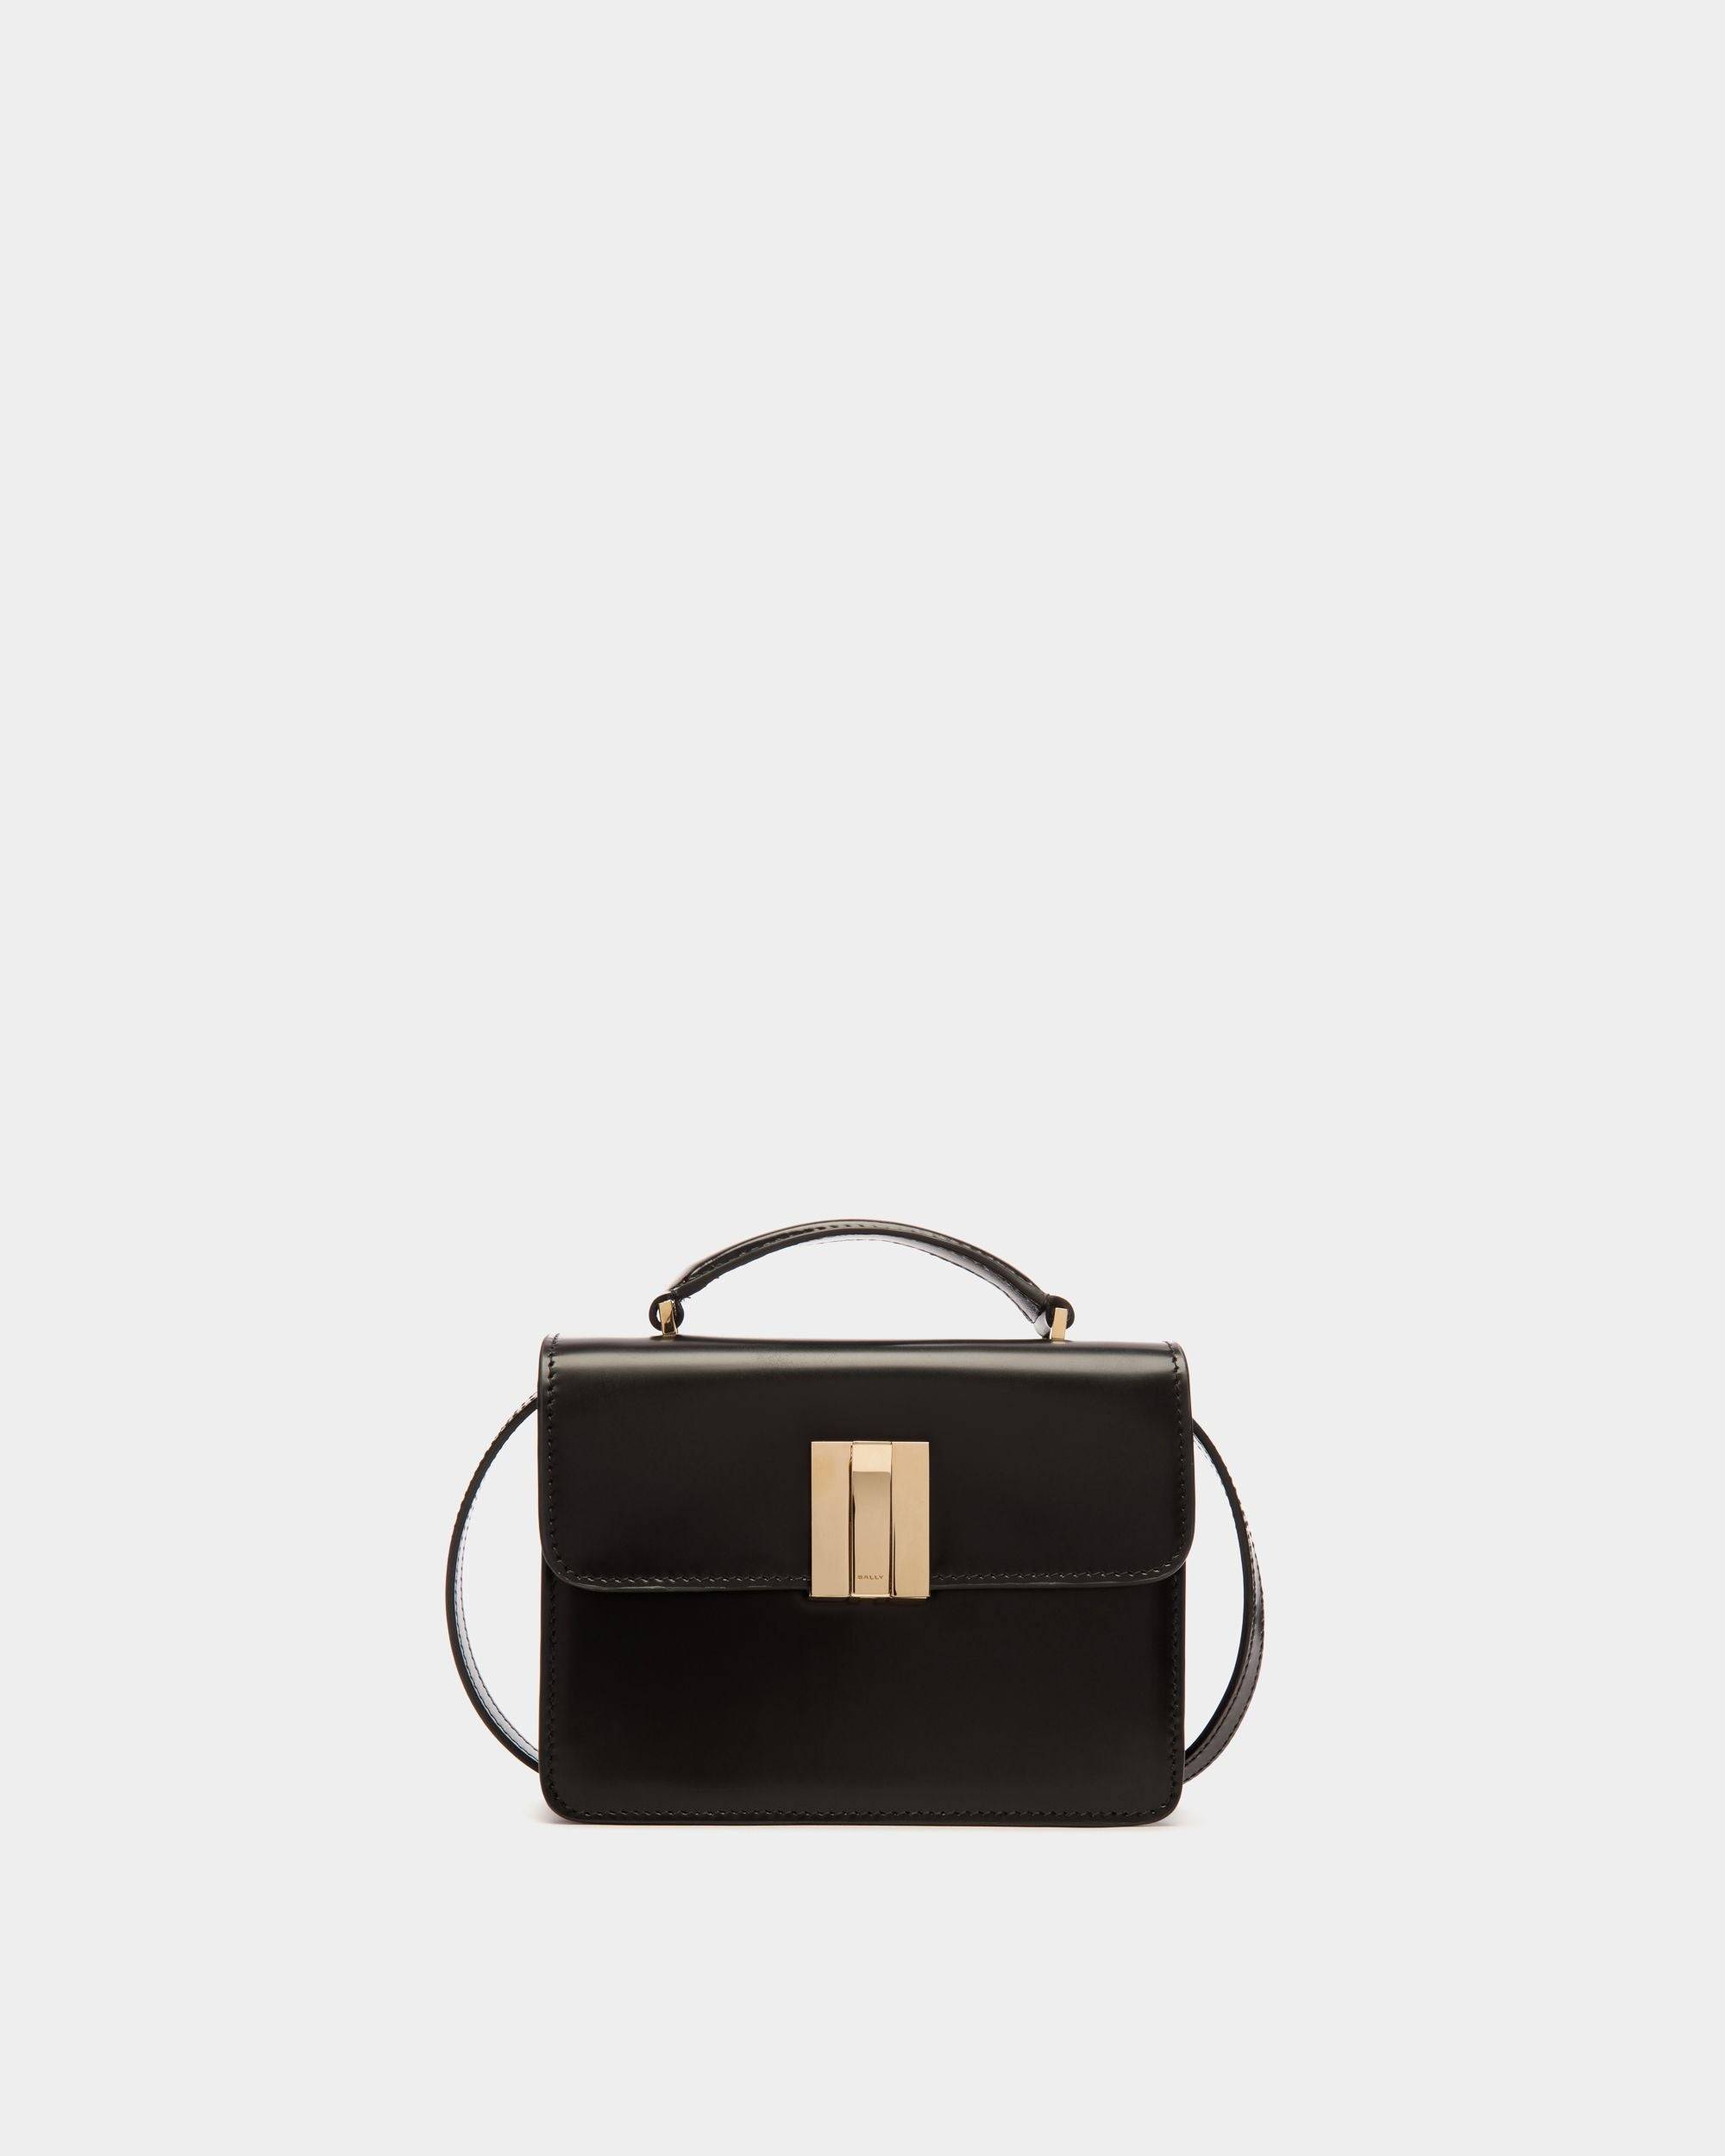 Ollam | Women's Mini Top Handle Bag in Black Brushed Leather | Bally | Still Life Front